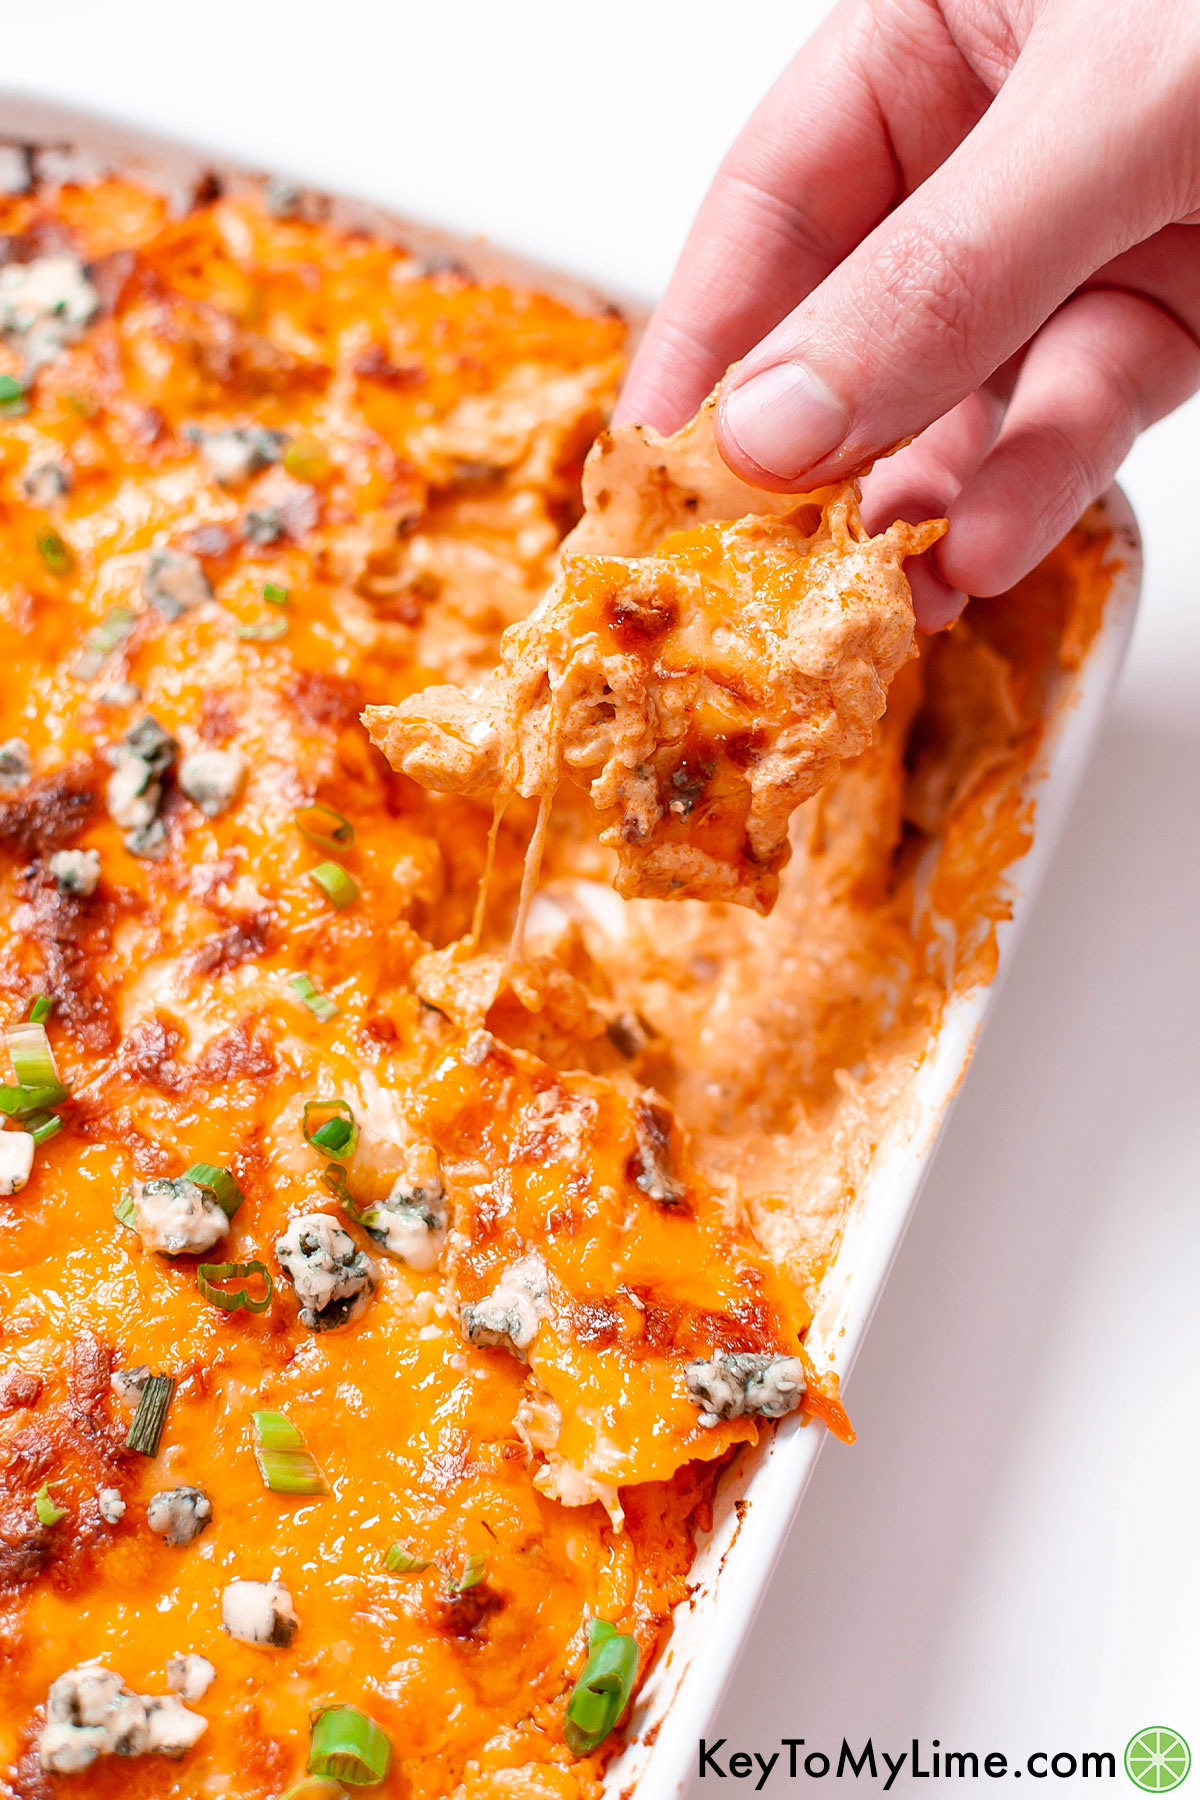 Taking a scoop of buffalo chicken dip with a tortilla chip.